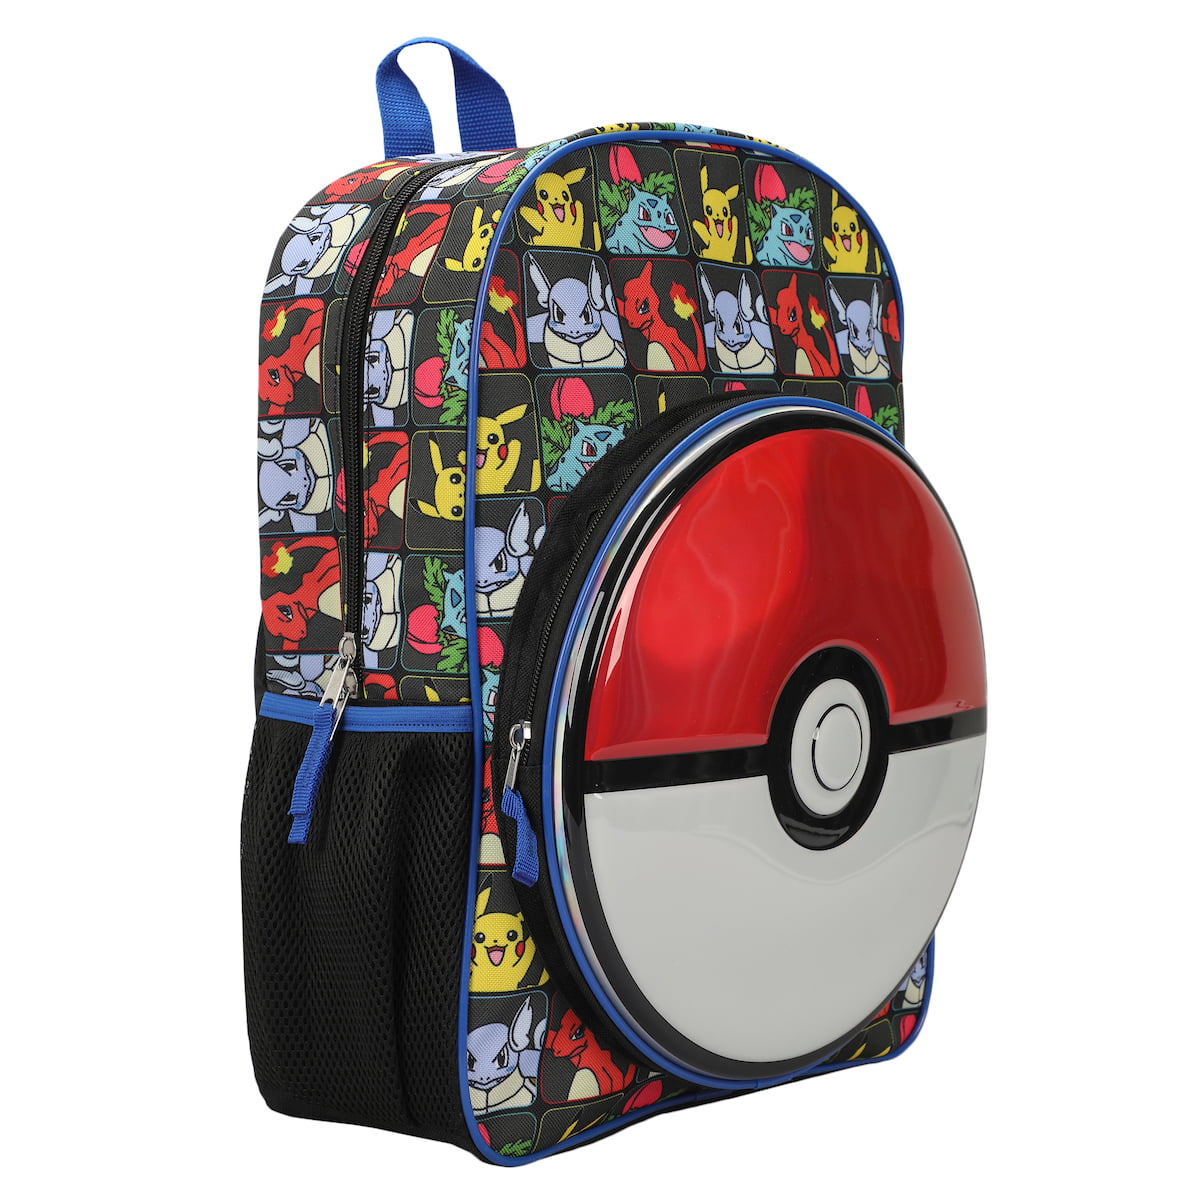 The Coolest Pokémon Backpacks and School Supplies